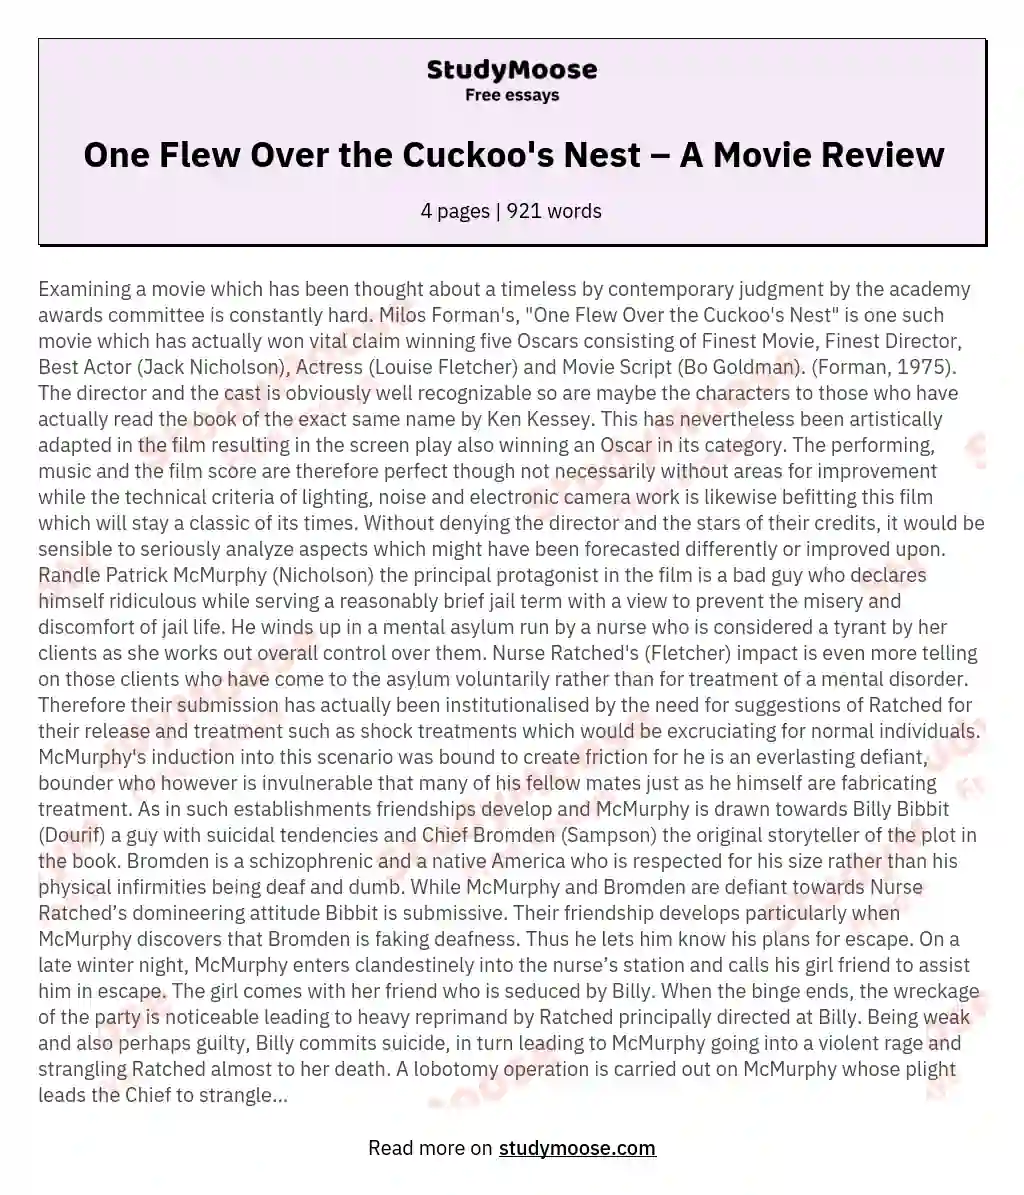 One Flew Over the Cuckoo's Nest – A Movie Review